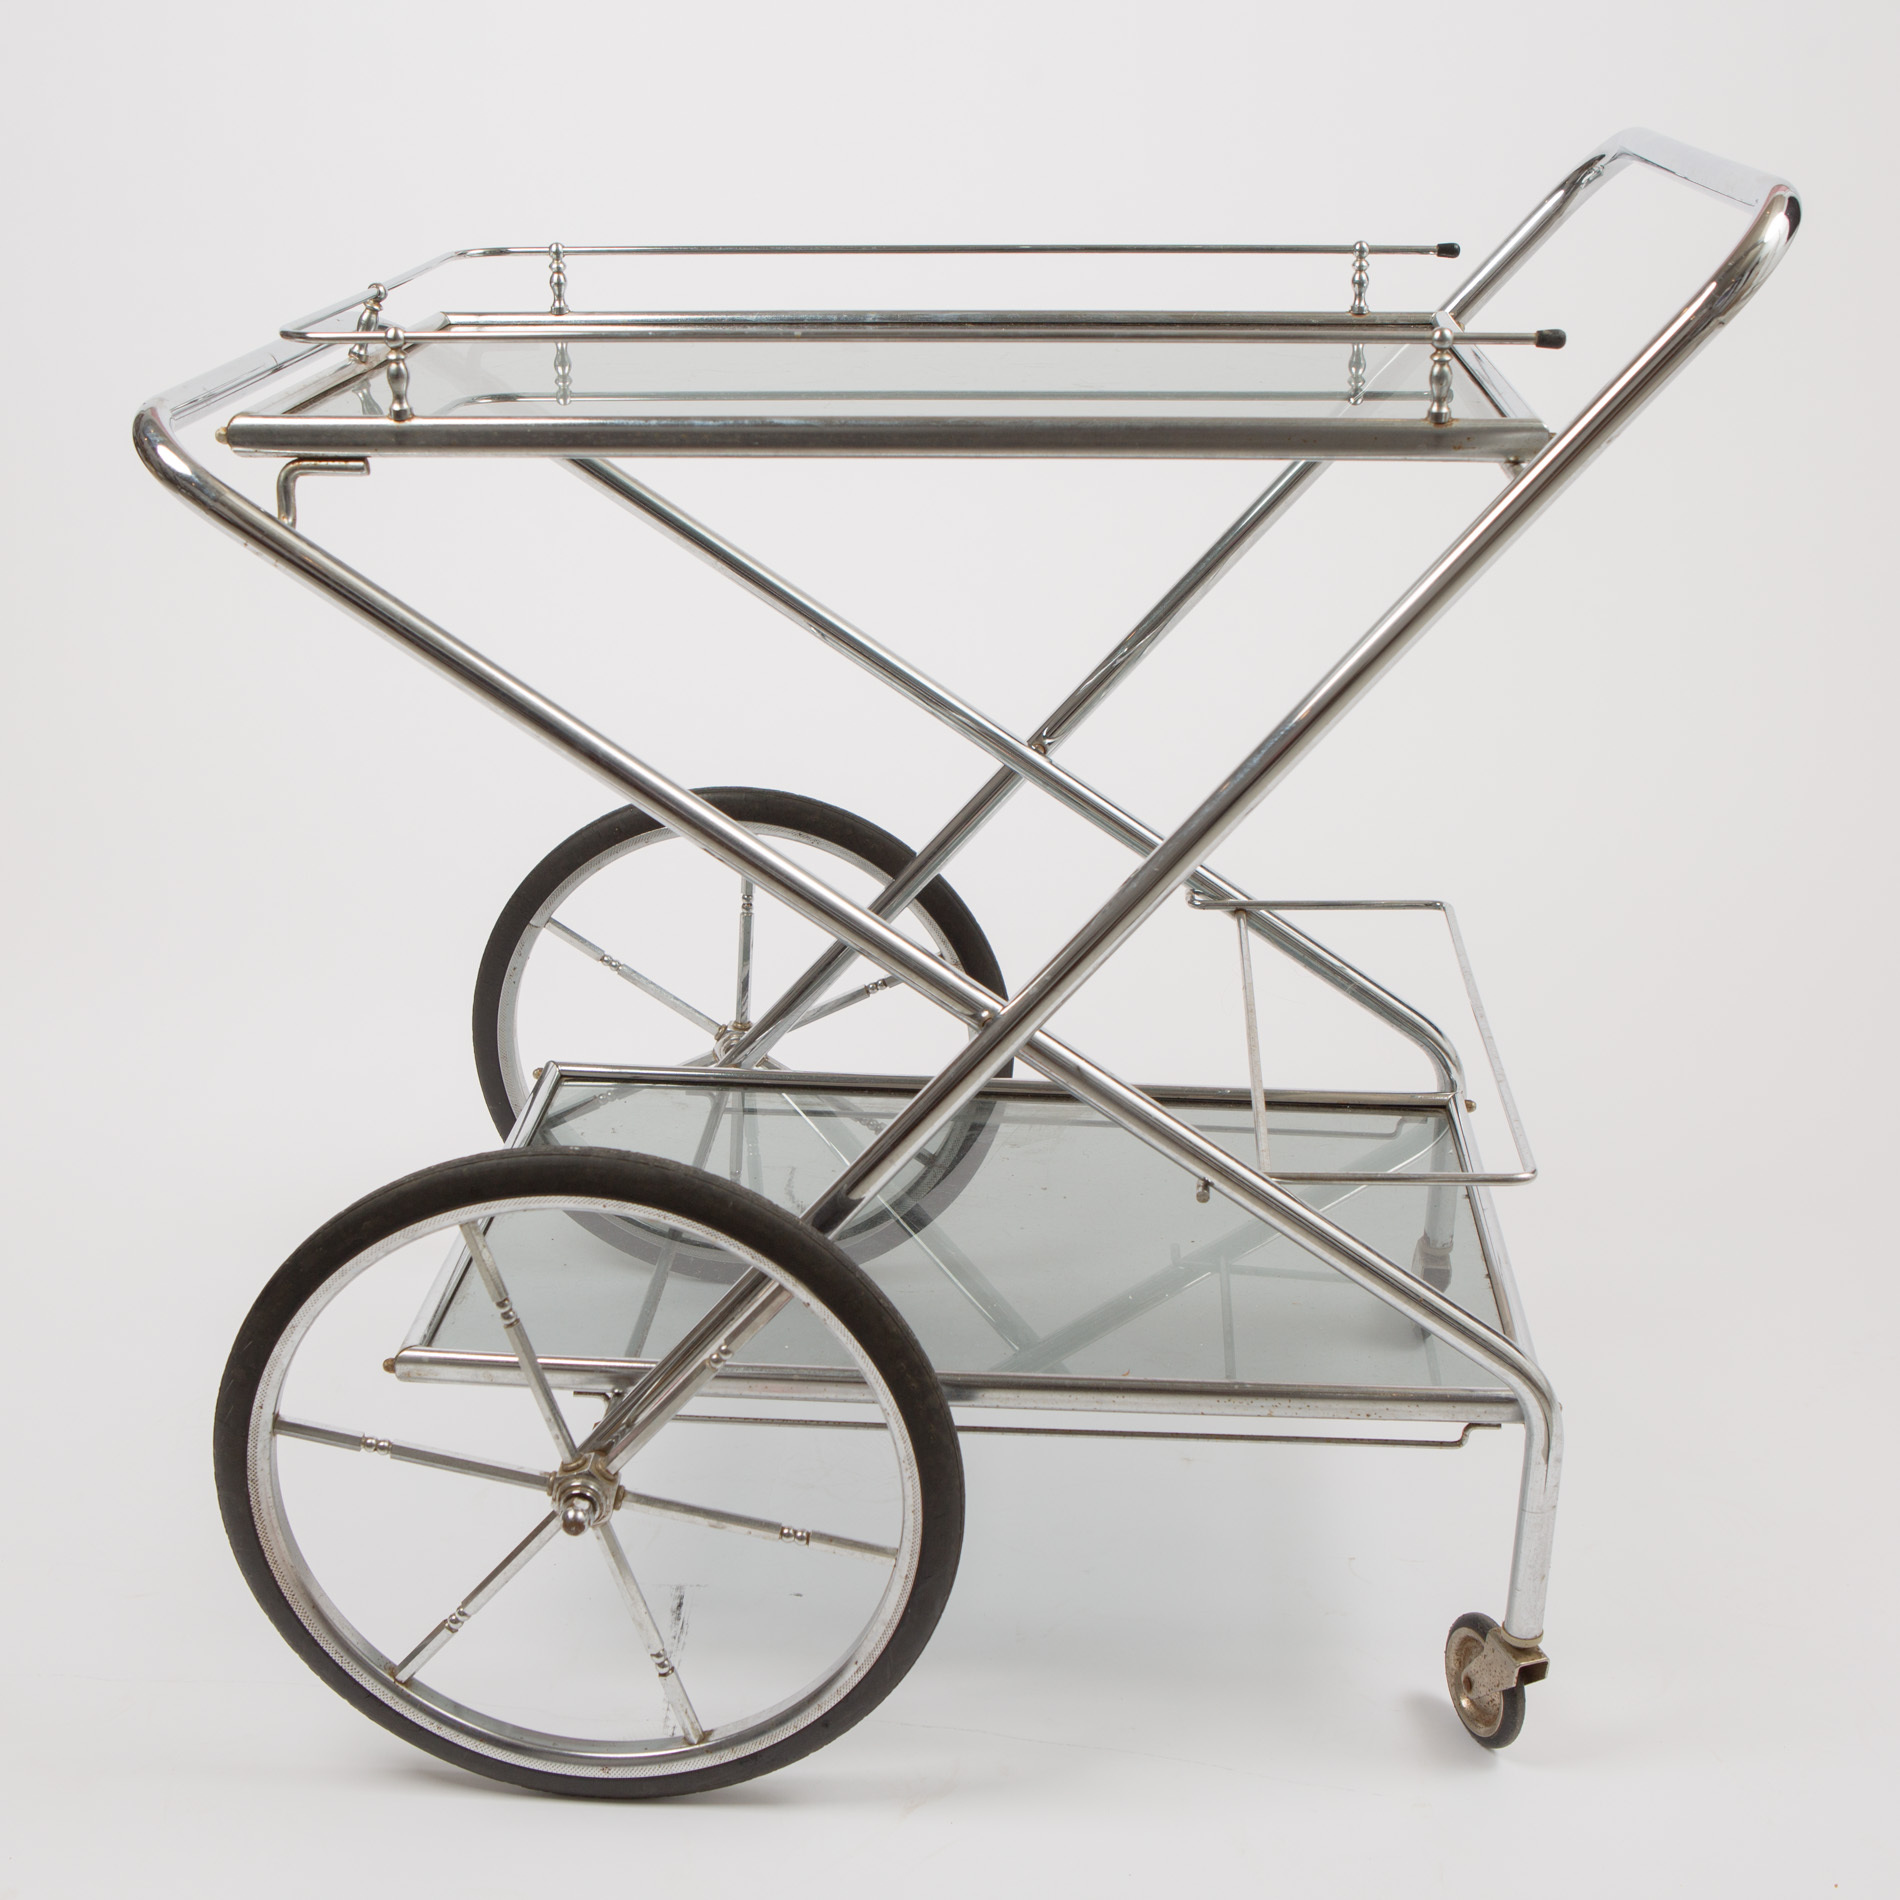 The image for Chrome Drinks Trolley00001